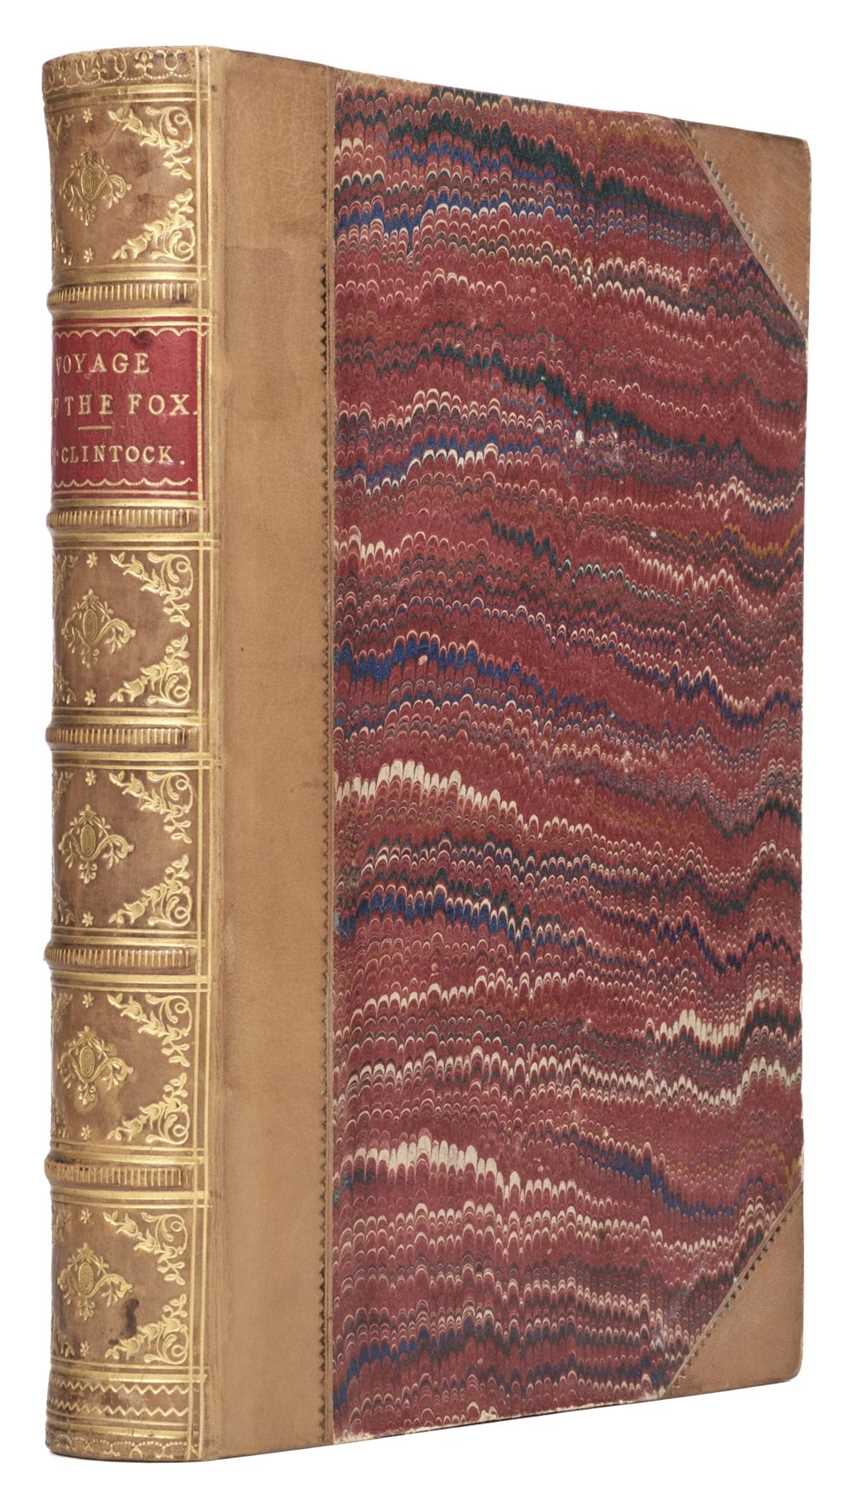 Lot 15 - M'Clintock (Captian F. L.). The Voyage of the 'Fox' in the Arctic Seas..., 1859